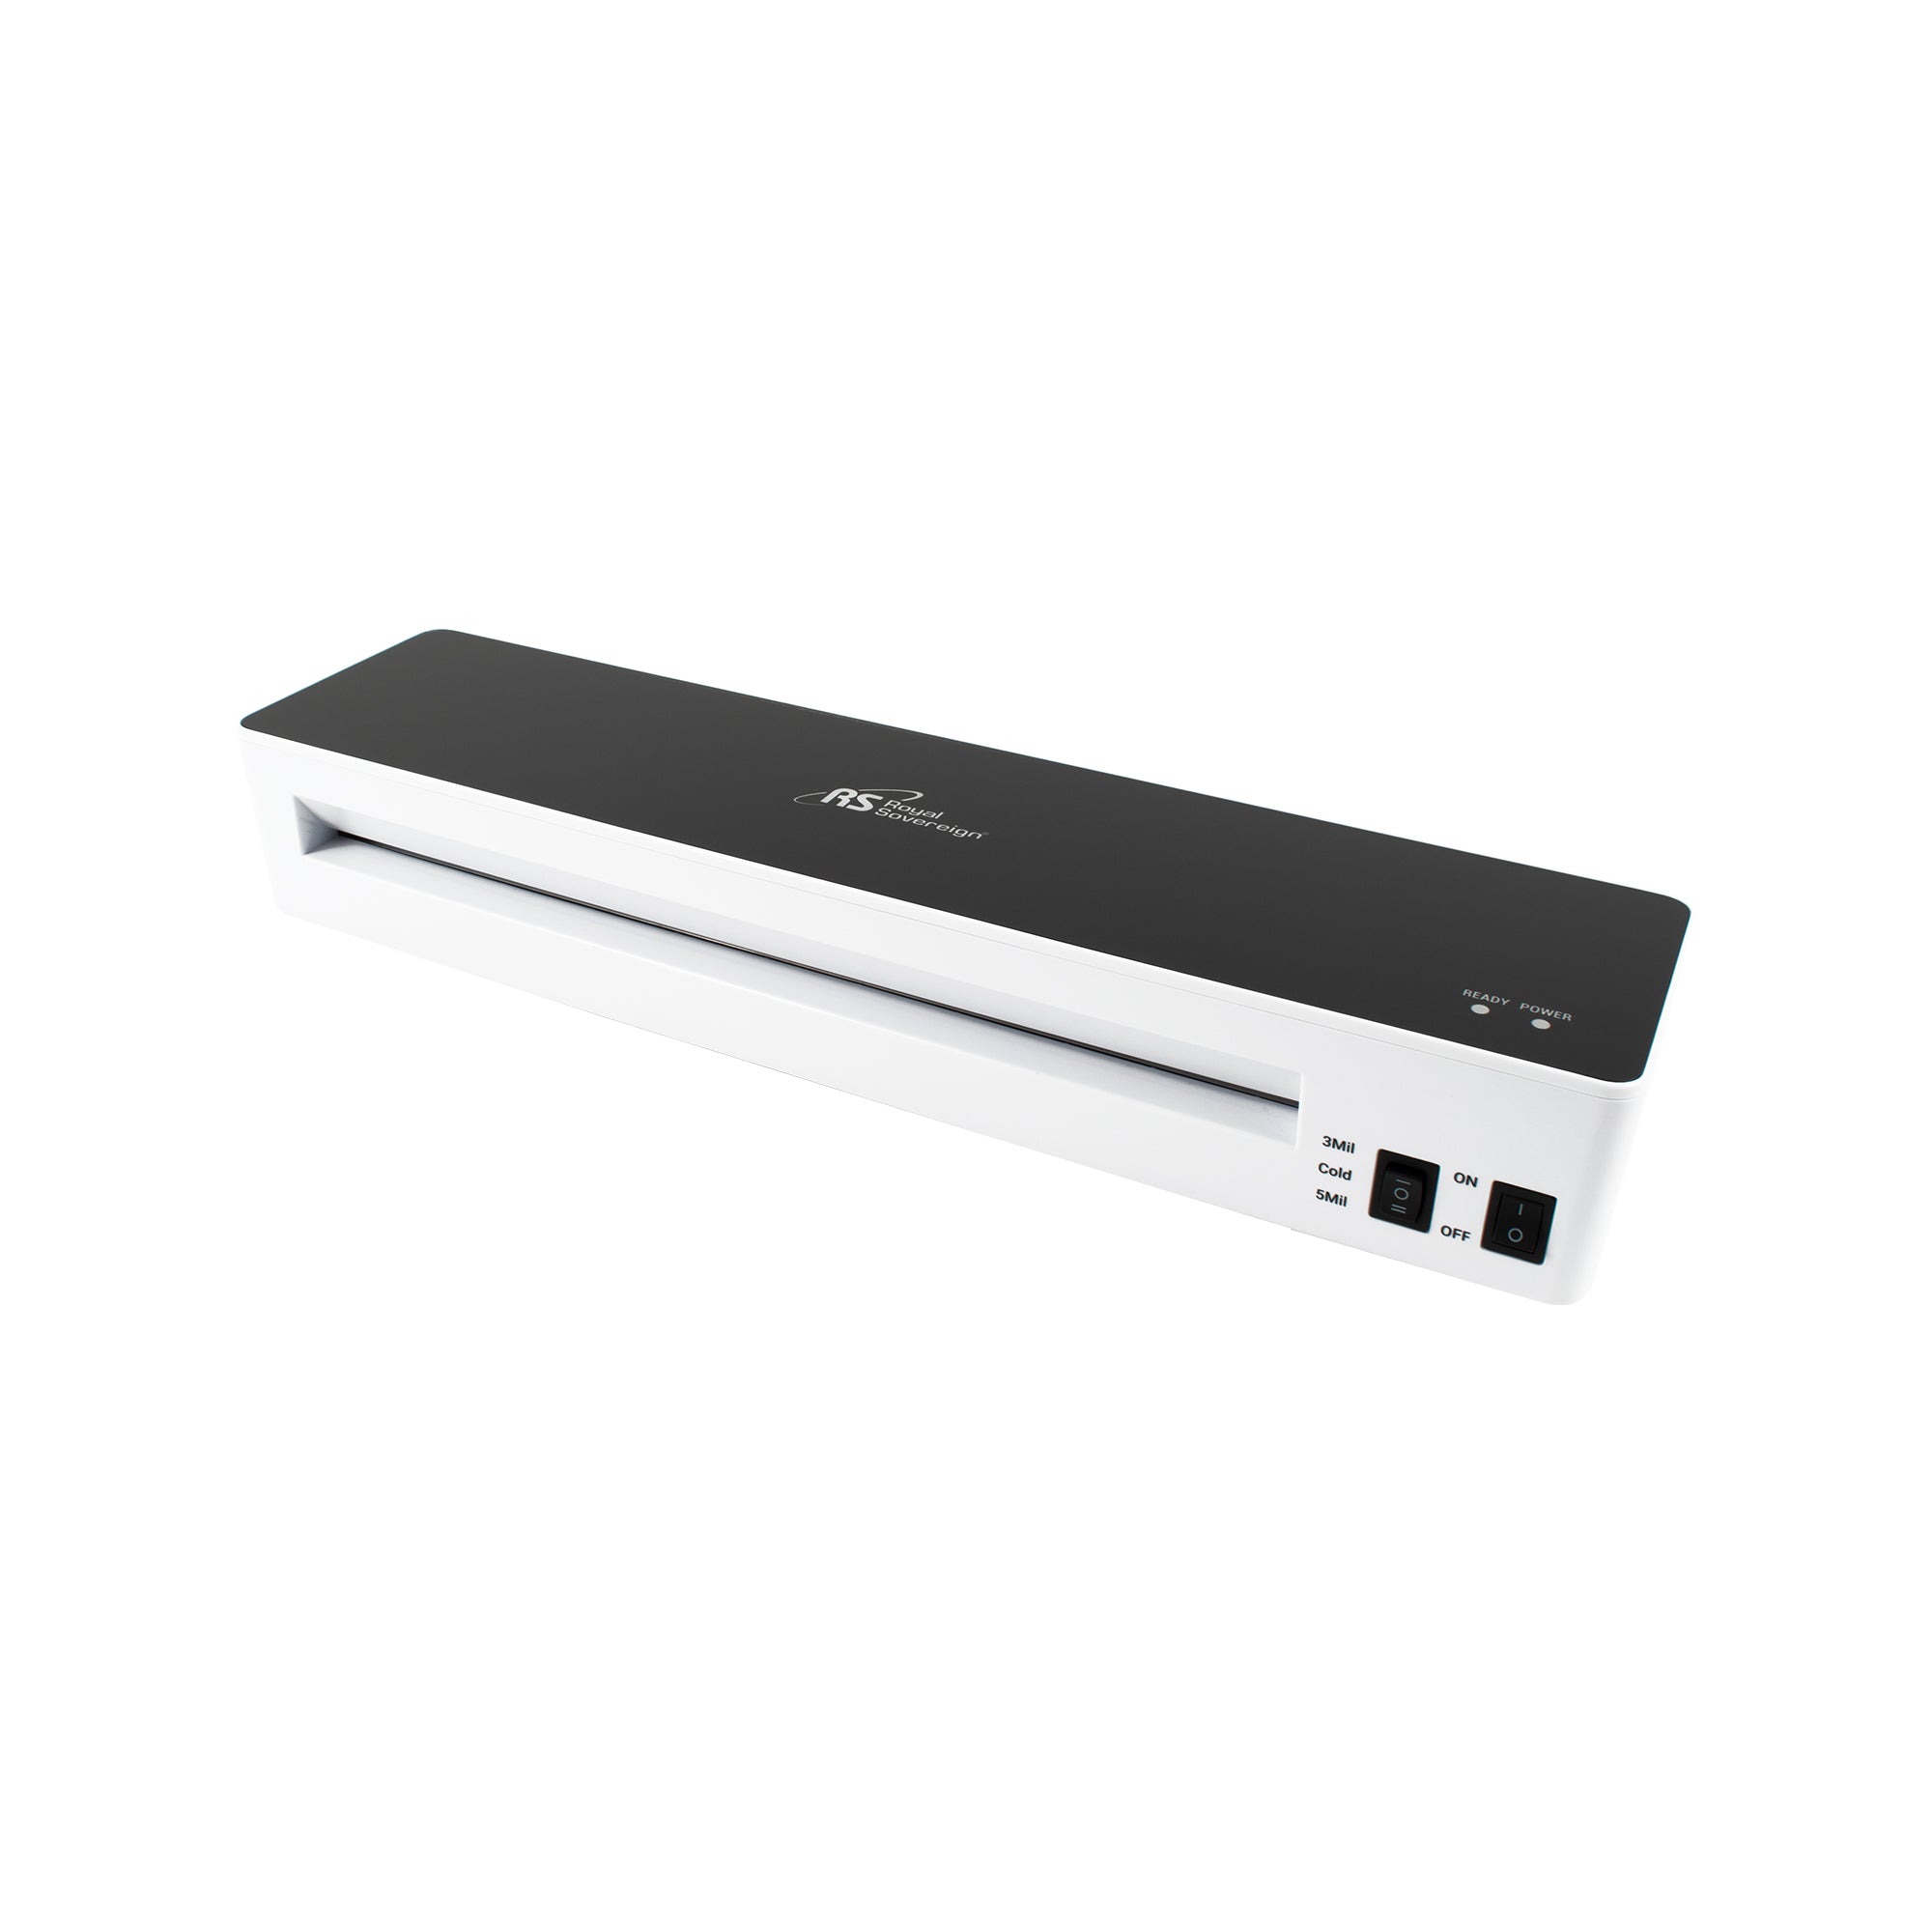 IL-1326W, 13" 2 Roller Glass-Top Pouch Laminator